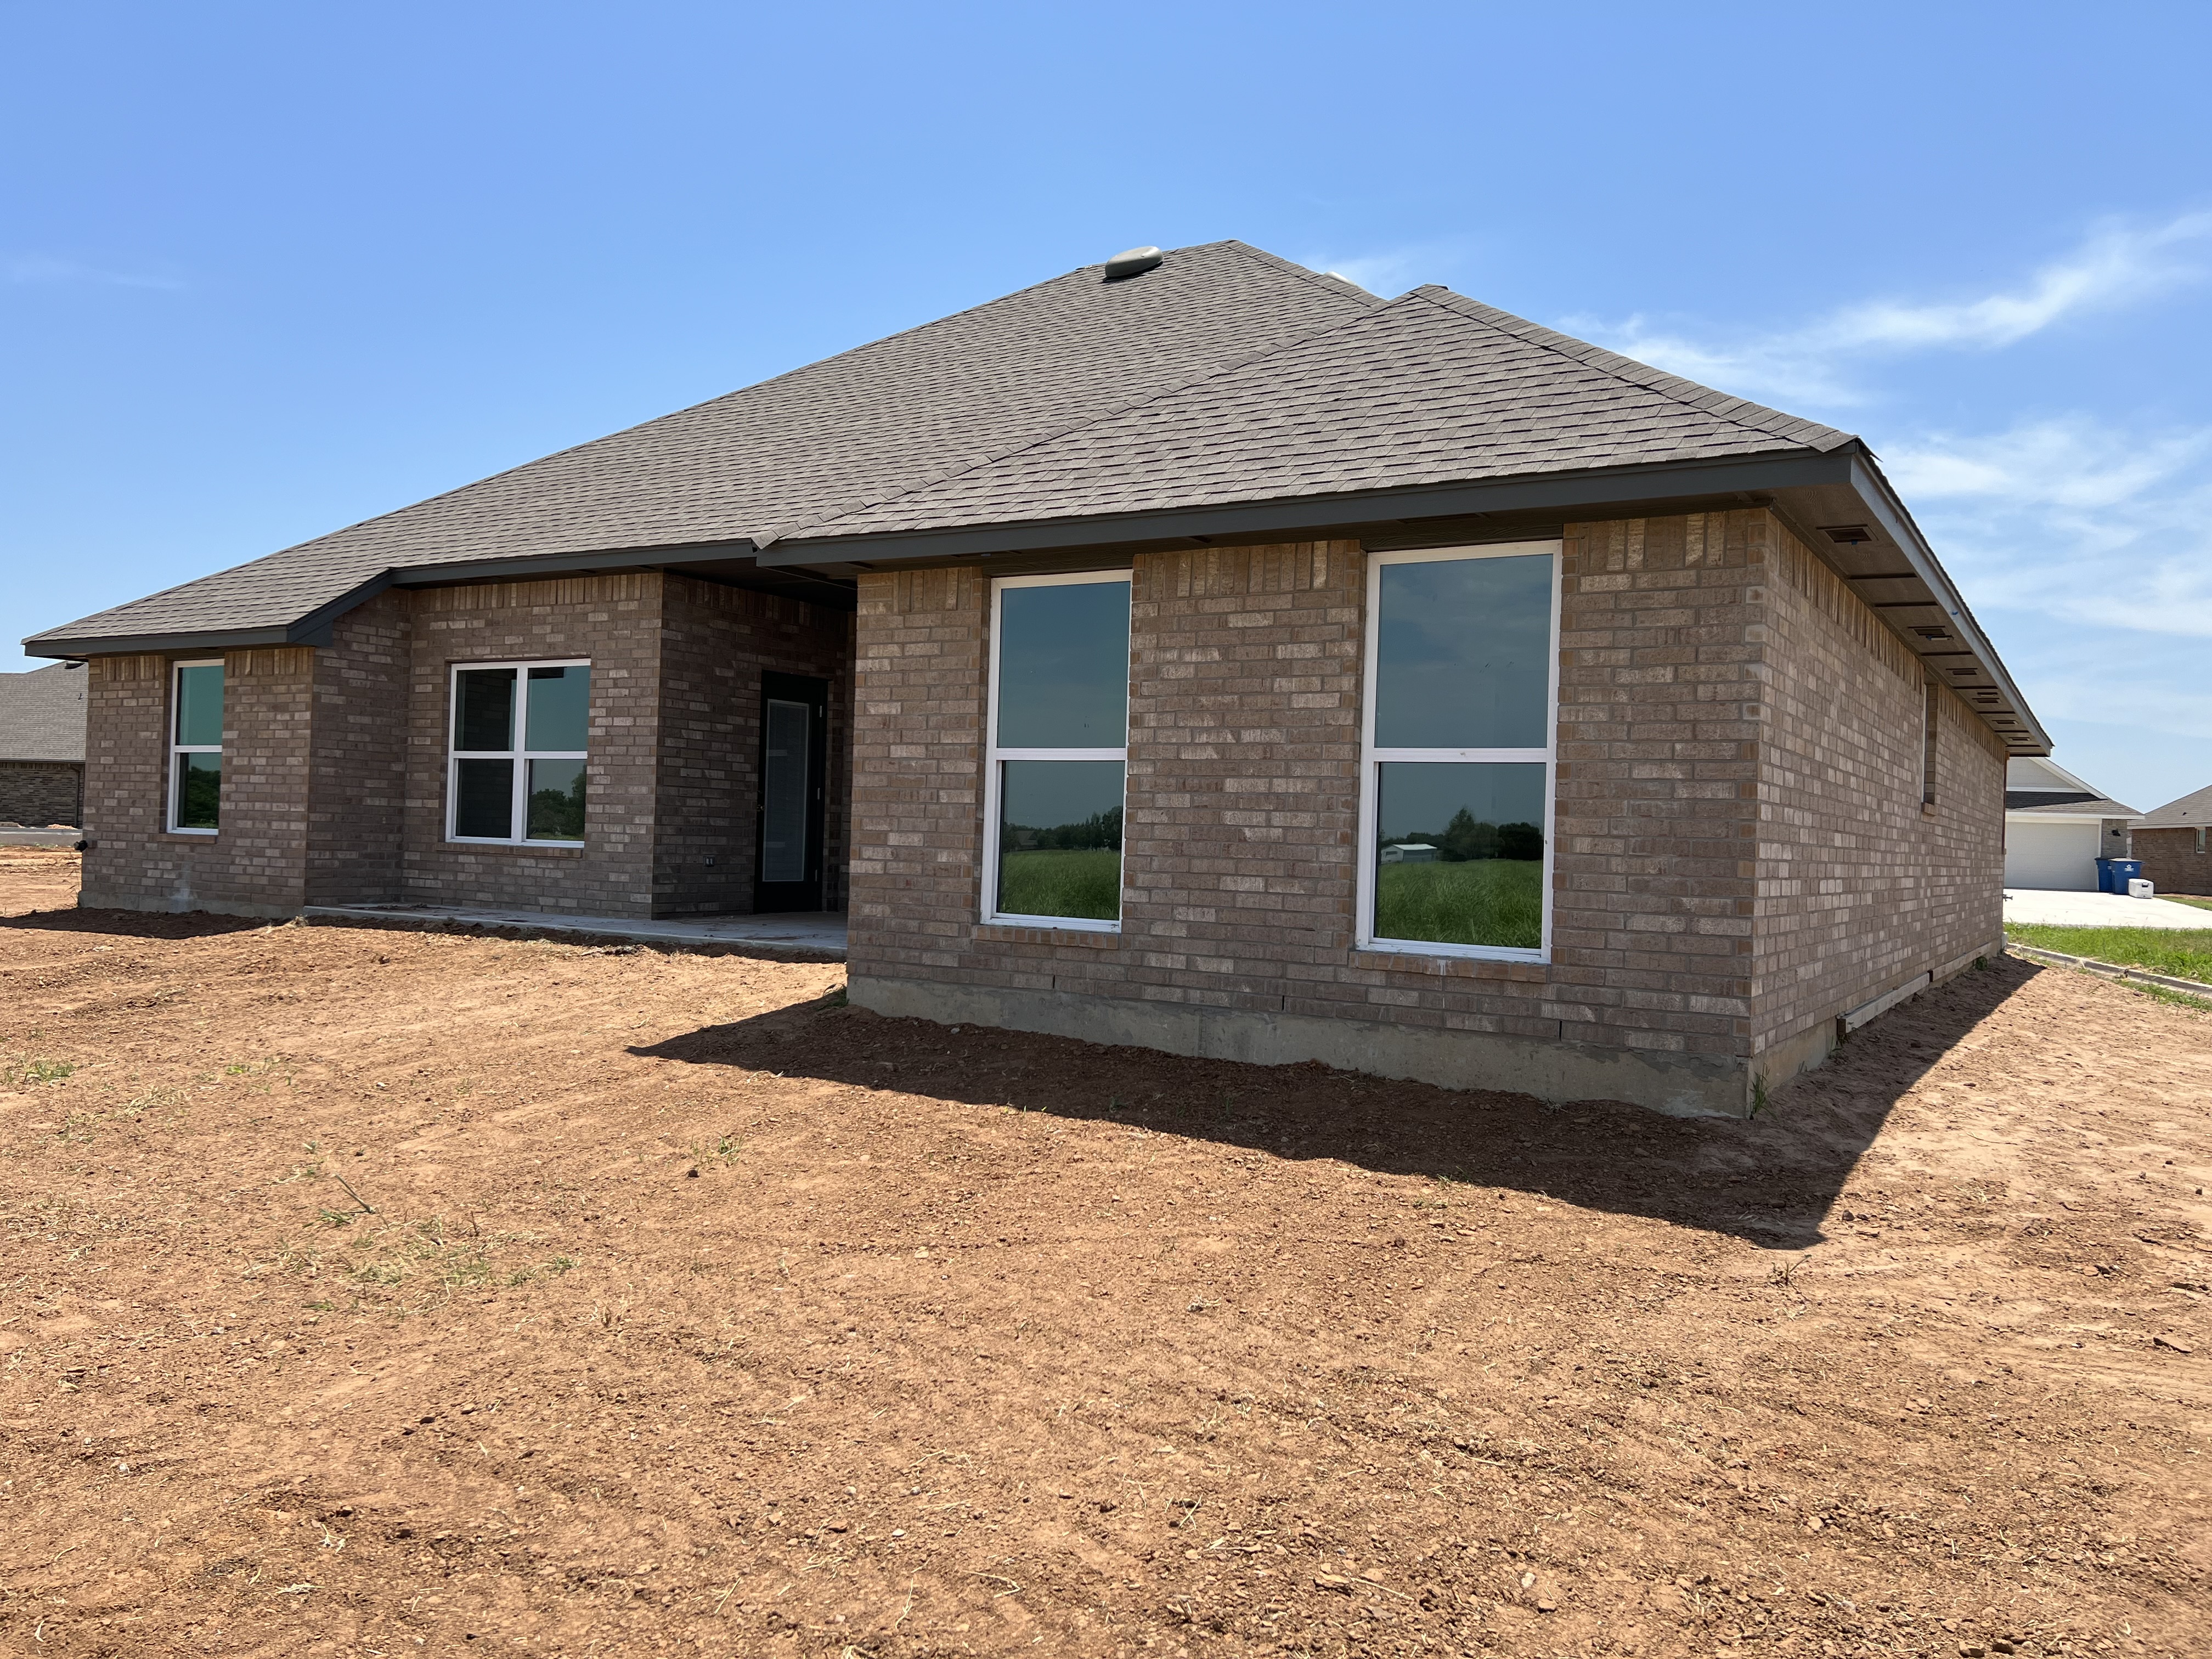 NW 12th Street, Newcastle, Oklahoma 73065, 4 Bedrooms Bedrooms, ,2 BathroomsBathrooms,House,For Sale,NW 12th Street,1389